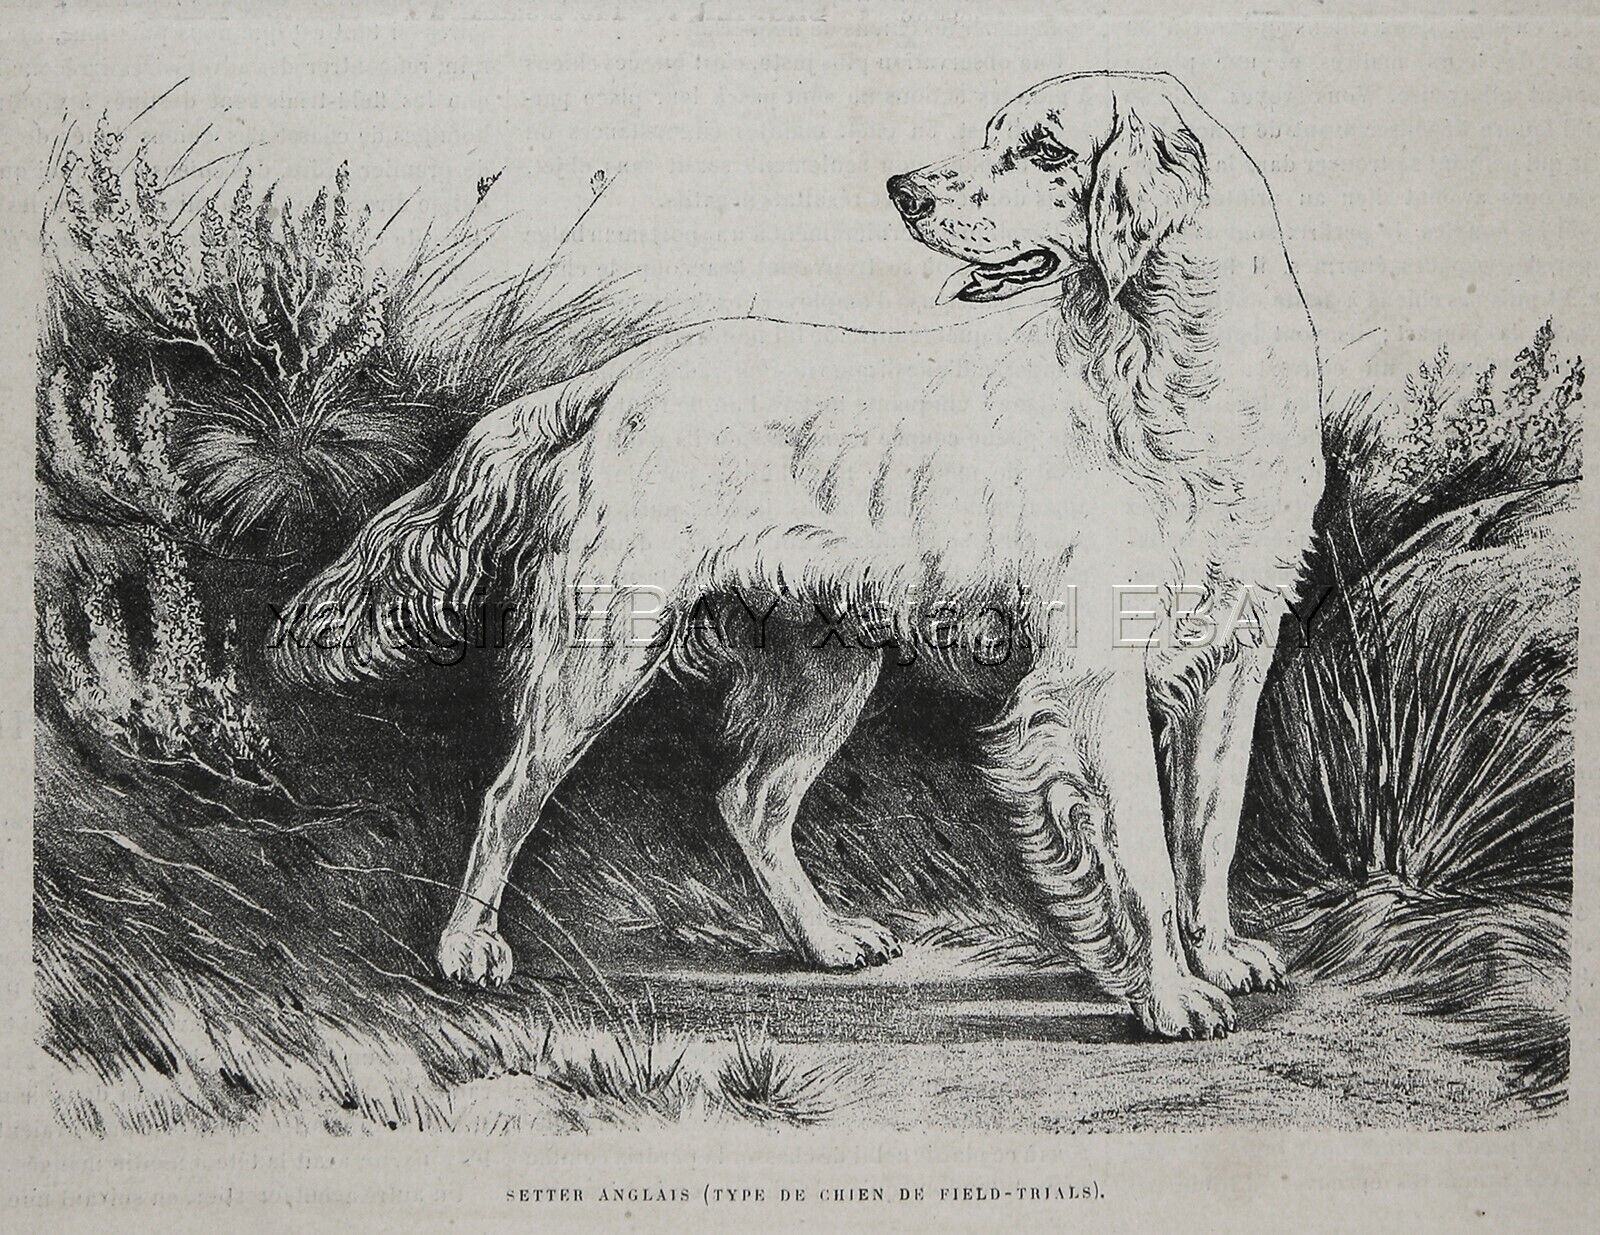 Dog English Setter (Breed Named) at Field Trials, 1880s Antique Print